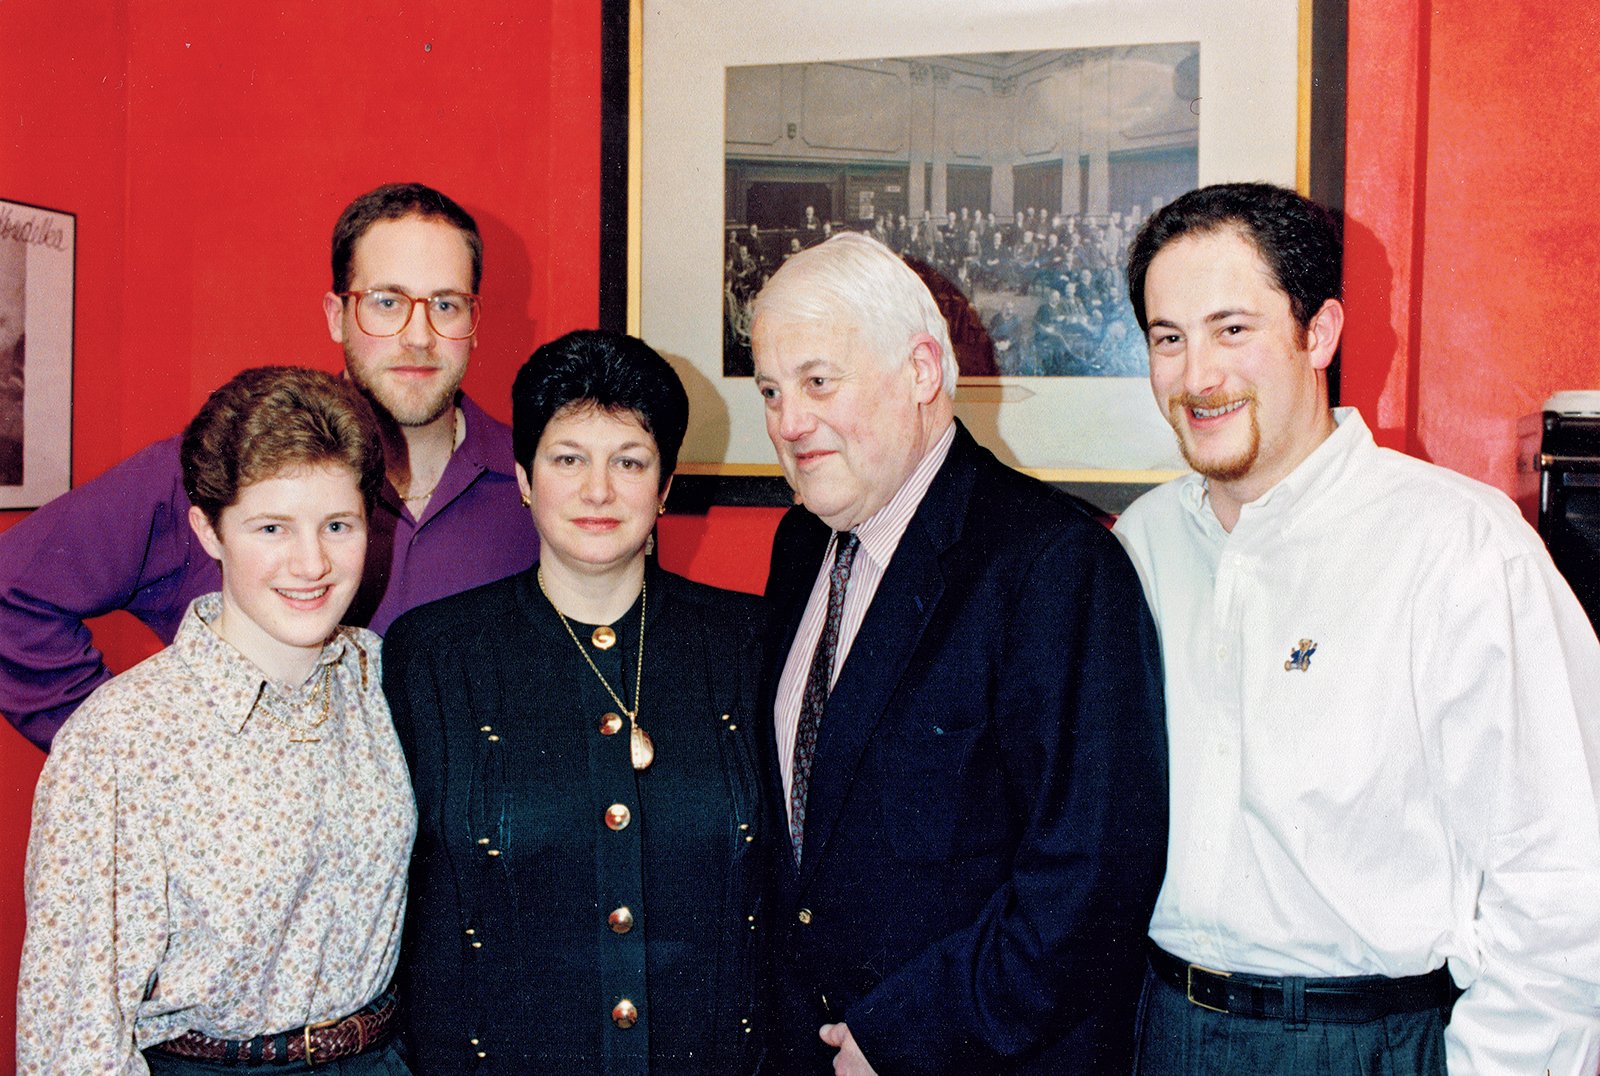 A surprise party for Lila and Geoffrey Kronn’s 30th Wedding Annversary. From left: Estelle, Jonathan, Lila, Geoffrey and David Kronn, Dublin 1994. Photograph by Mark Restan.